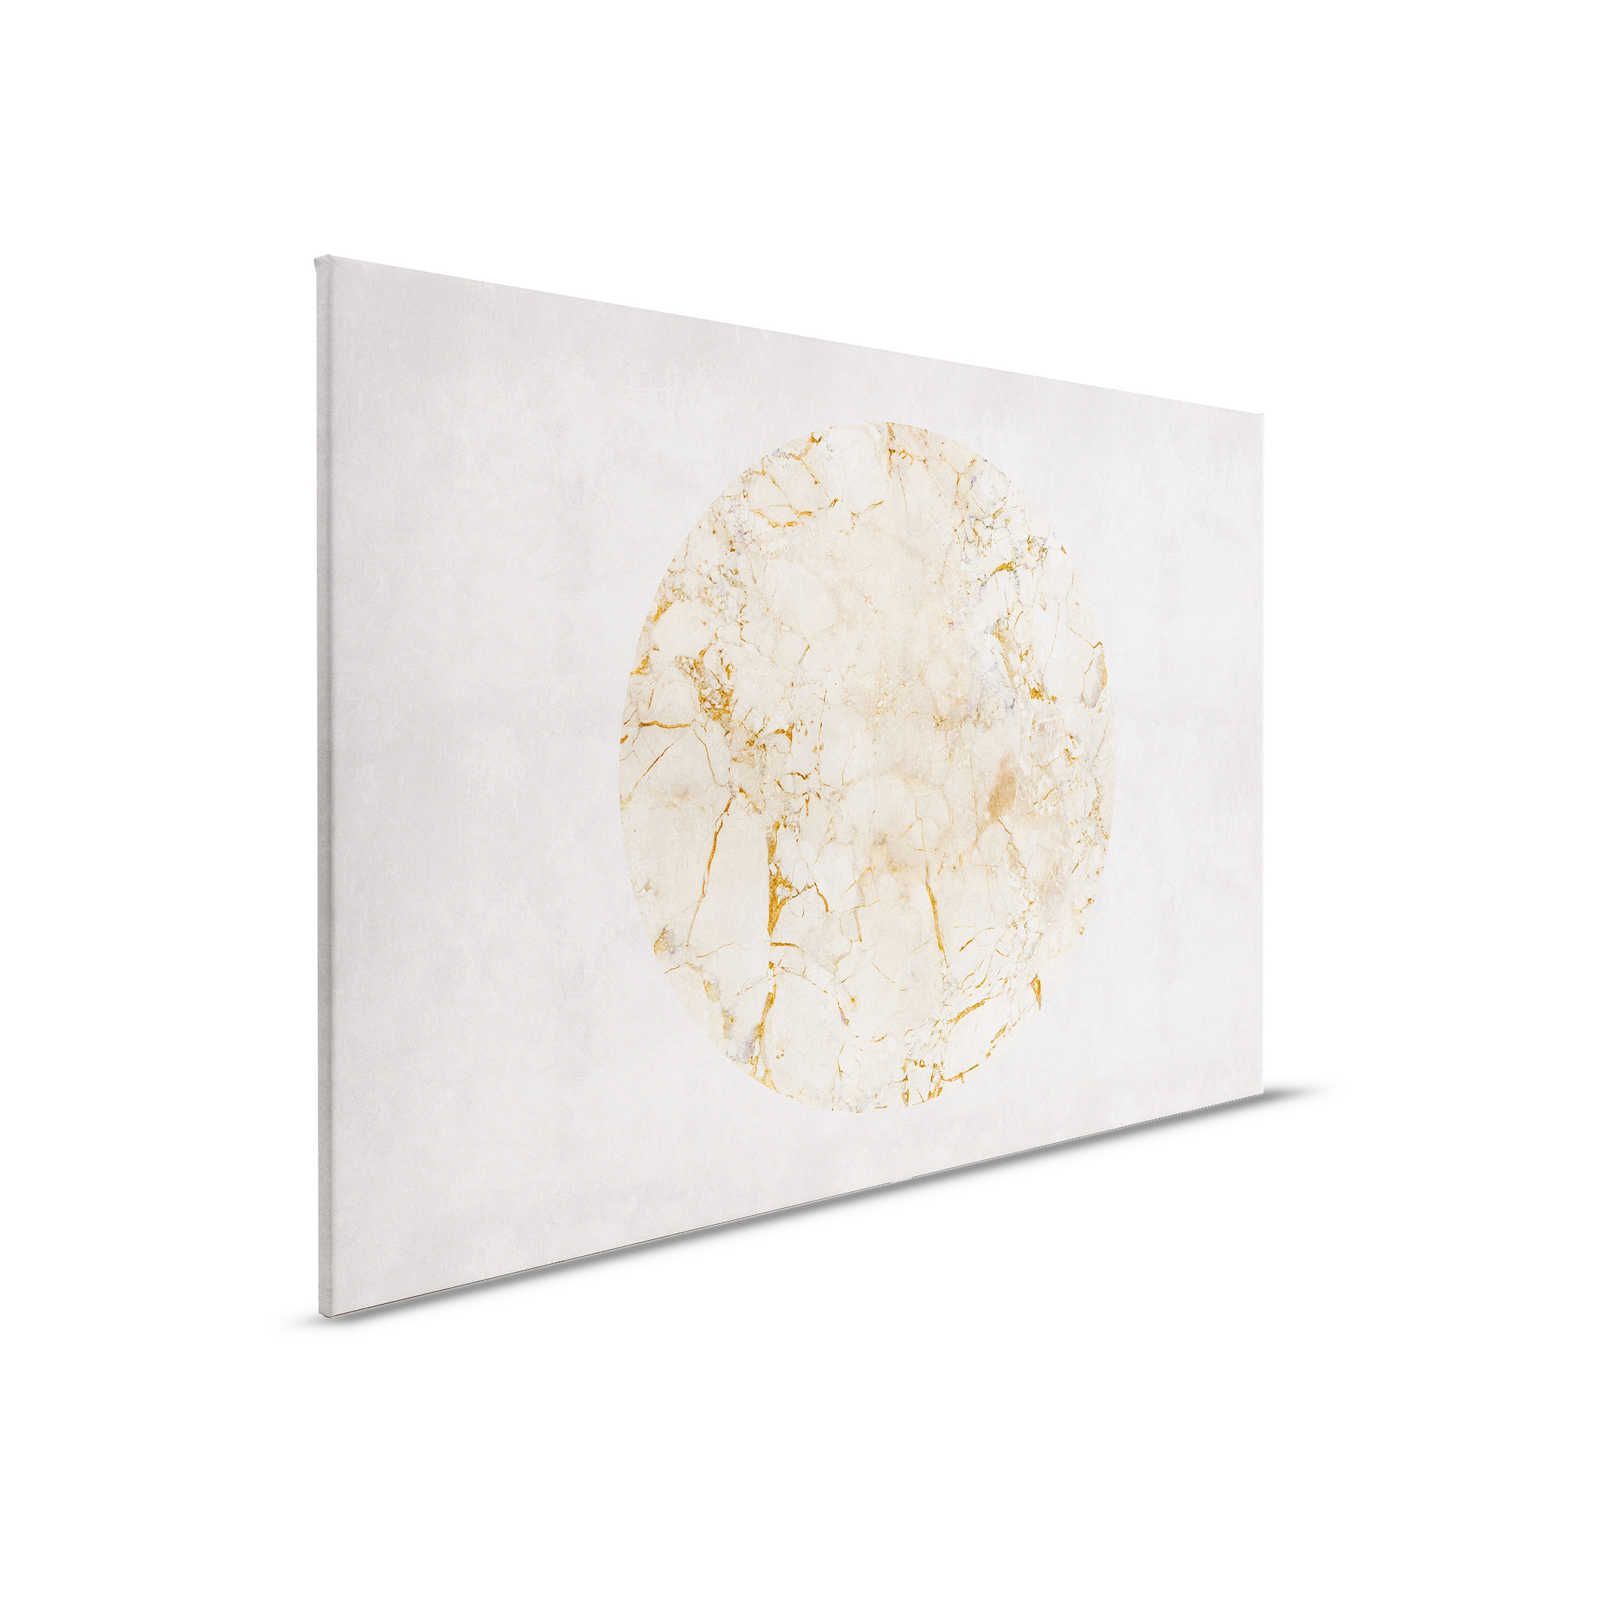         Venus 2 - Marble Canvas Painting Gold Pattern & Stone Look - 0.90 m x 0.60 m
    